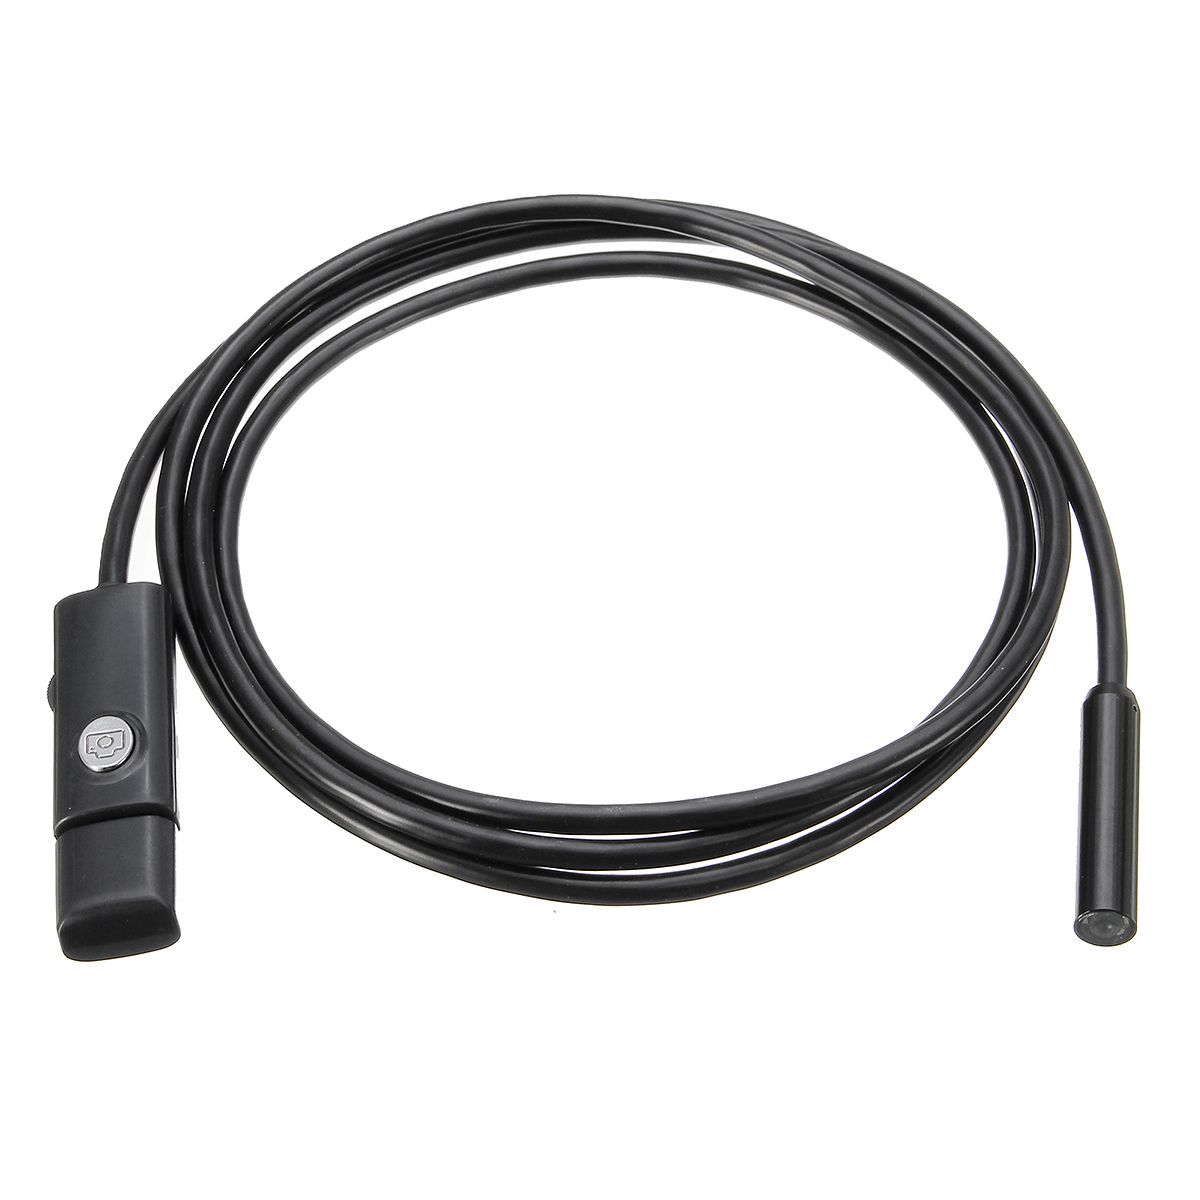 6-LED-9mm-Lens-Waterproof-IP67-USB-Wire-Borescope-Camera-Inspection-Borescope-Tube-Camera-for-Androi-1068605